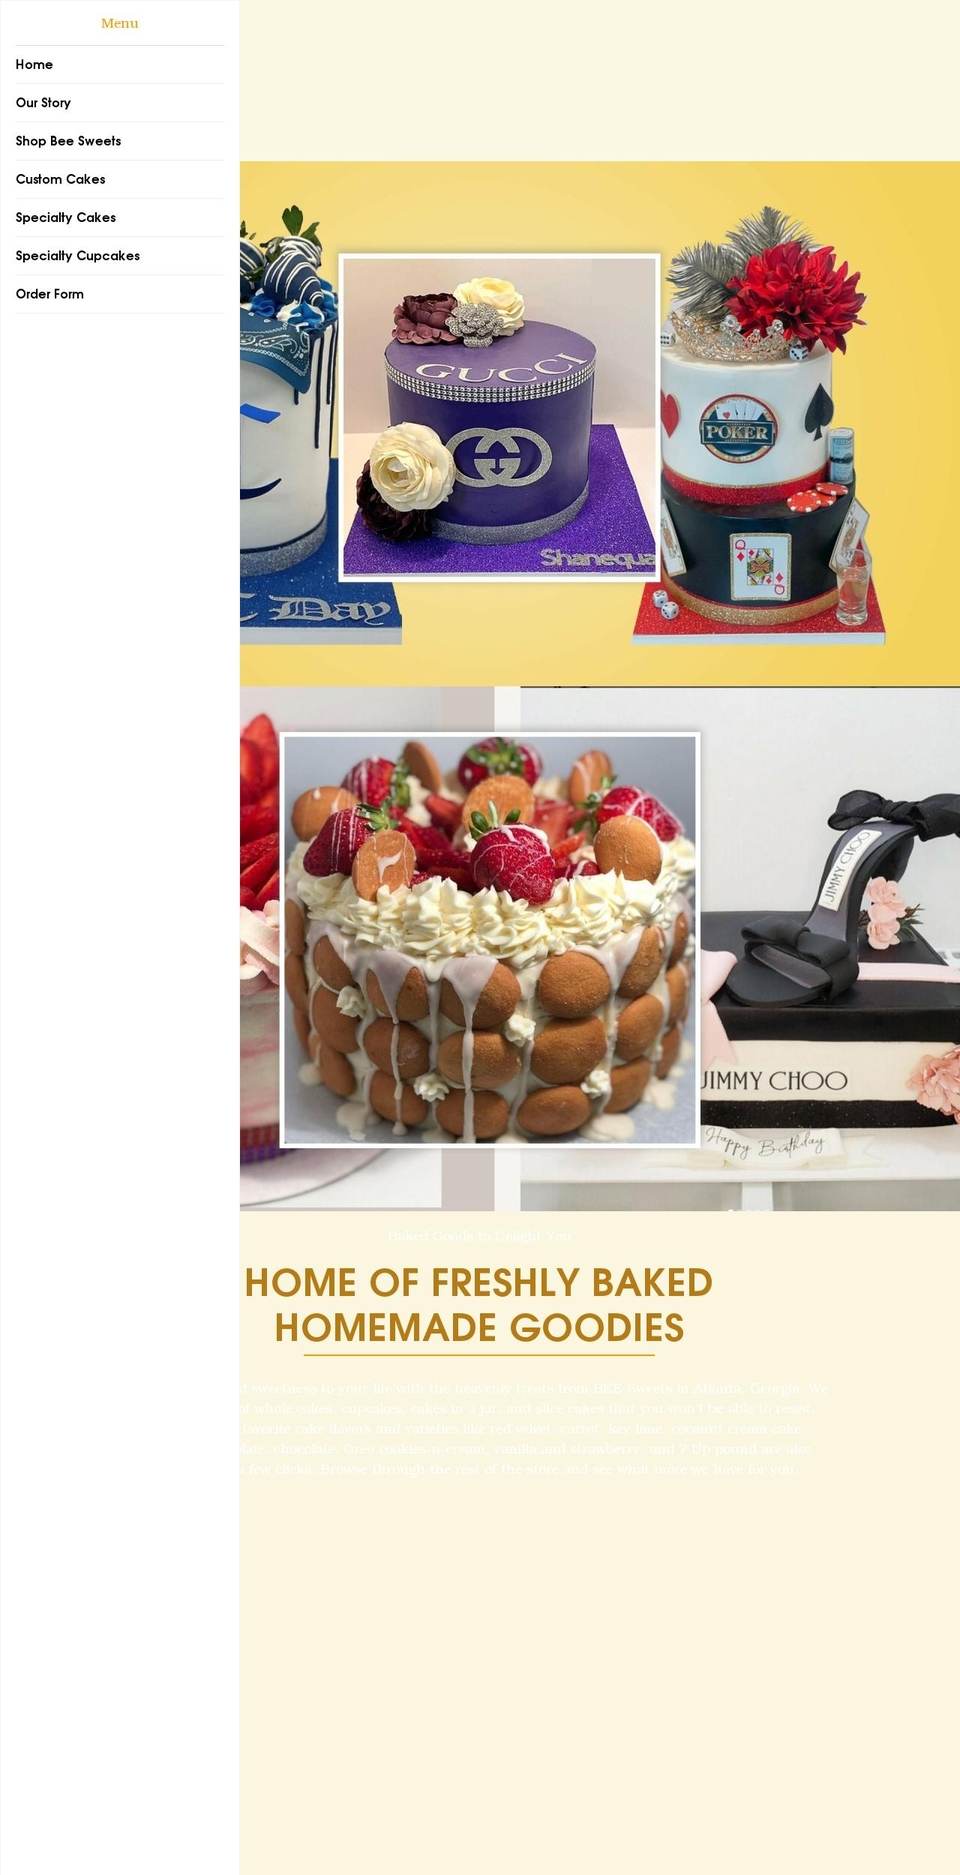 Bakery Shopify theme site example beesweets78.com